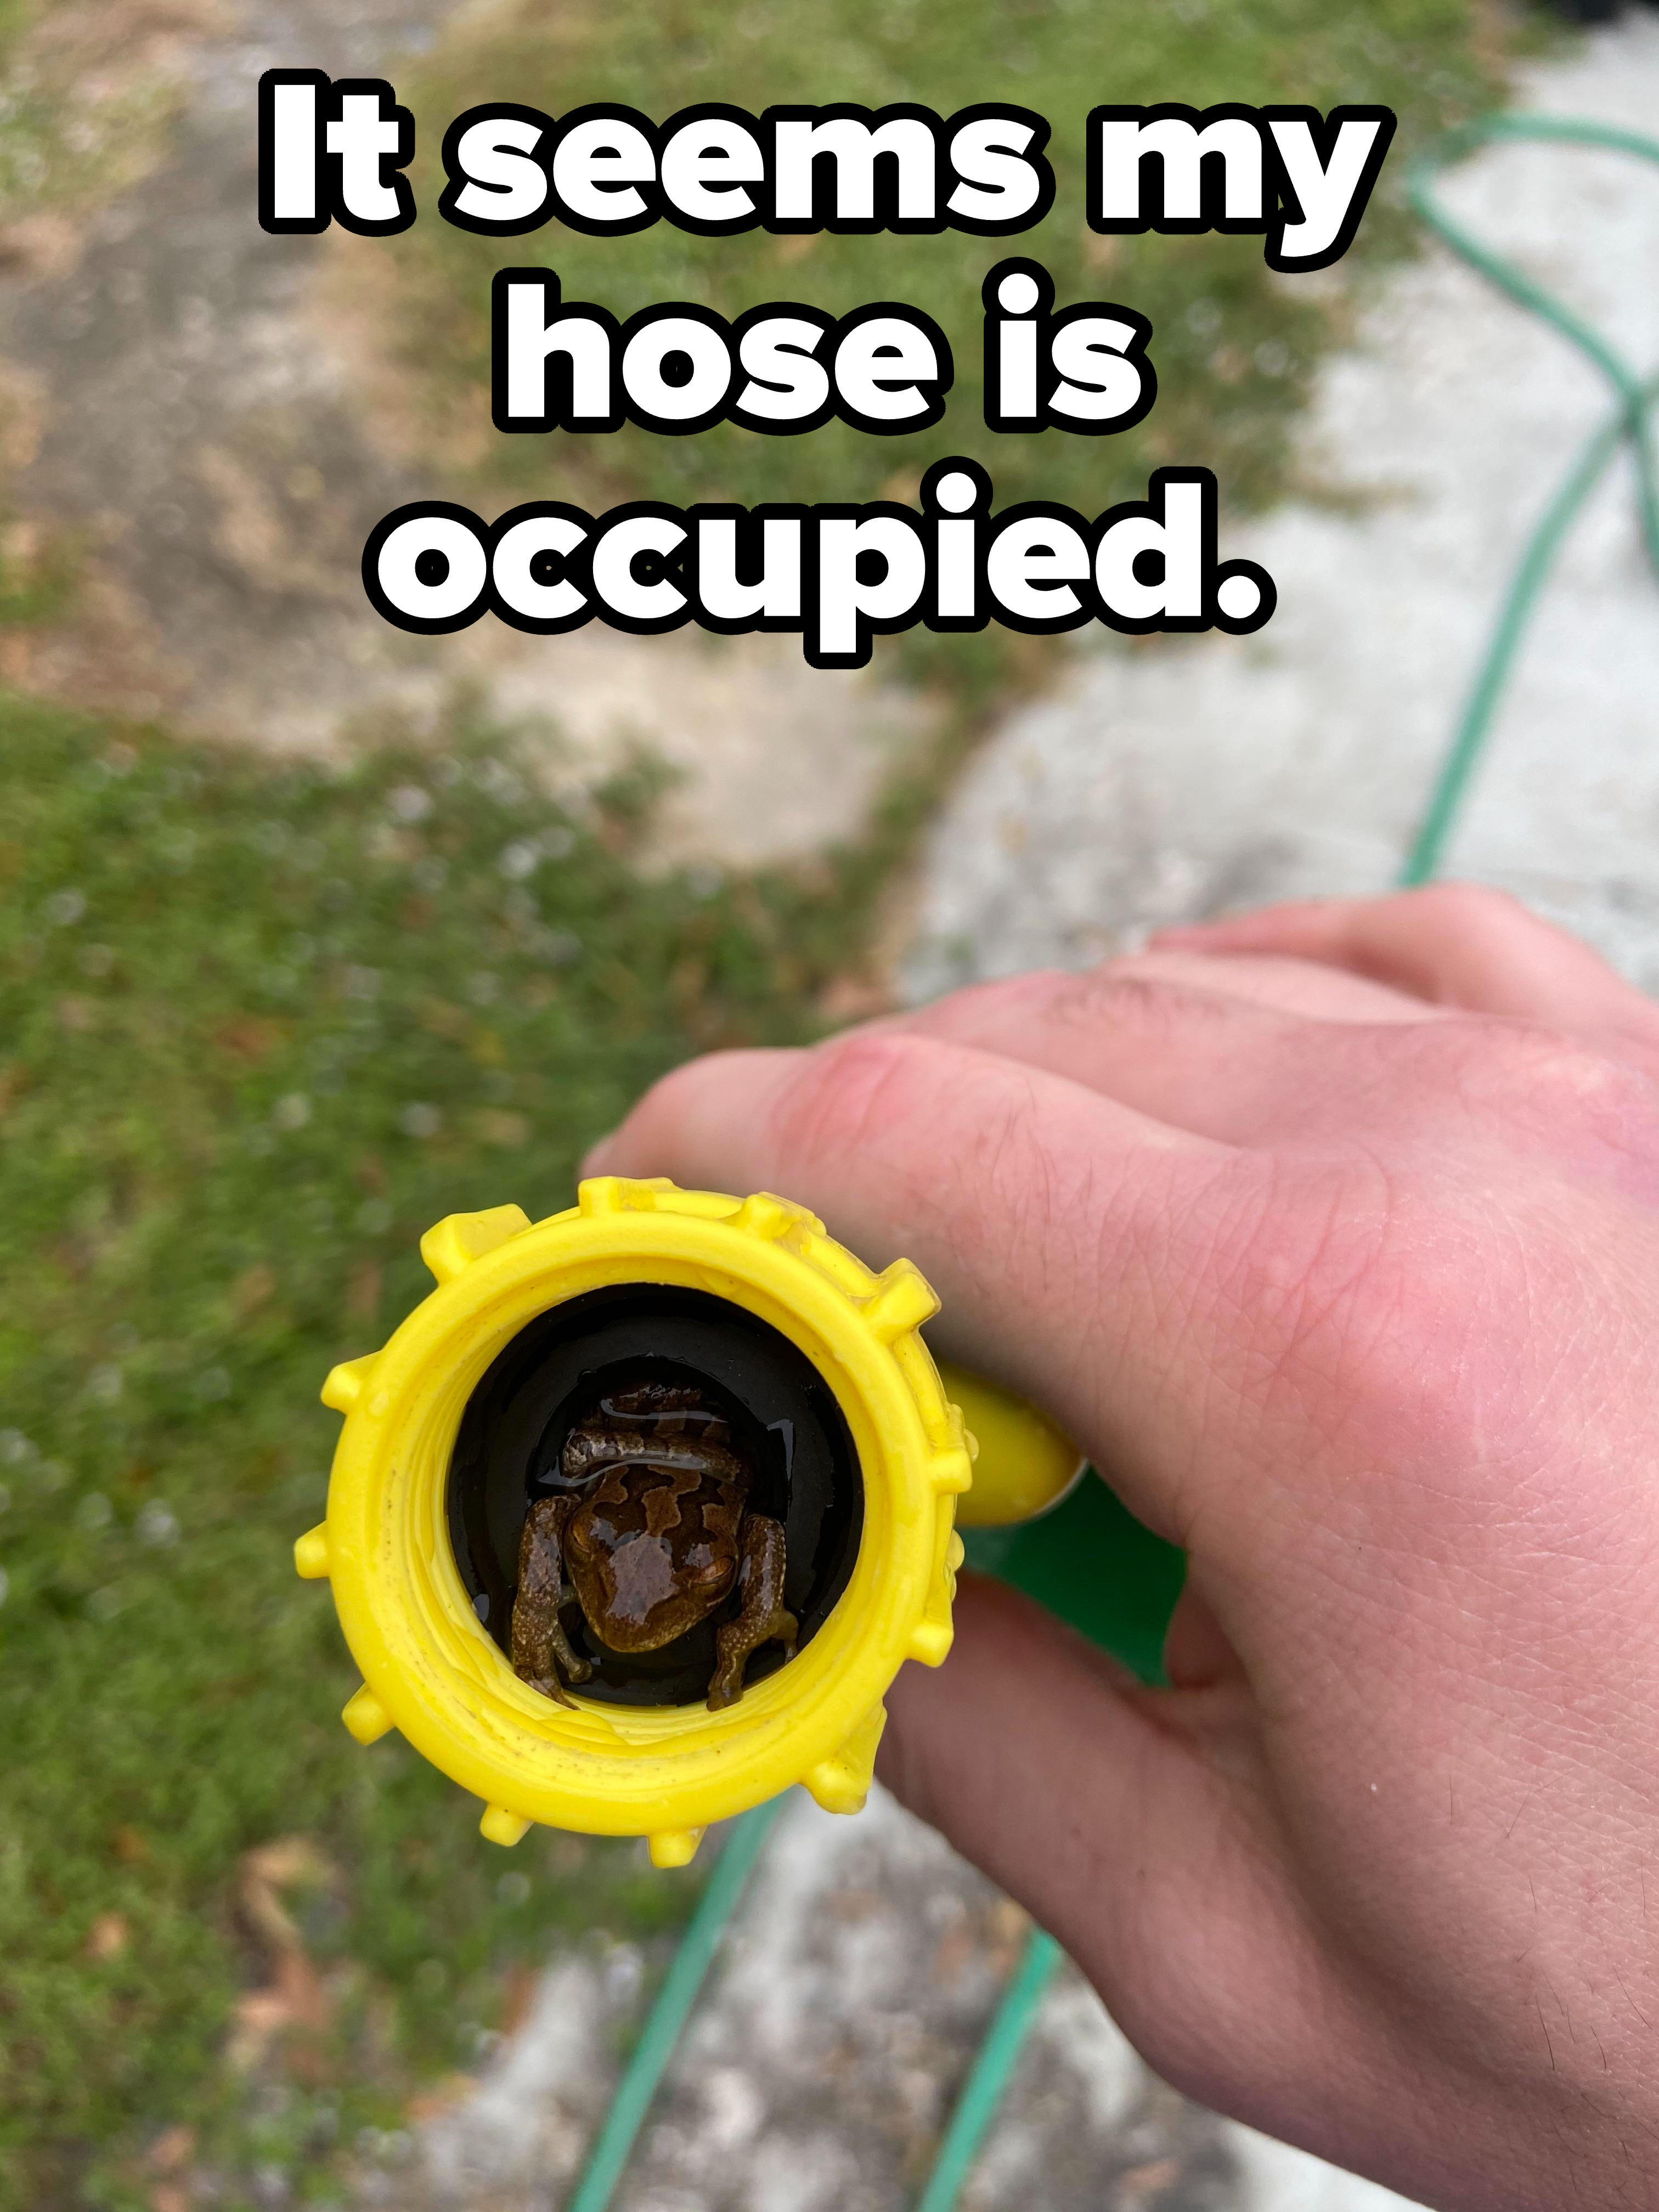 A small frog is seen inside the opening of a garden hose nozzle held by a person's hand. There are patches of grass and concrete visible in the background